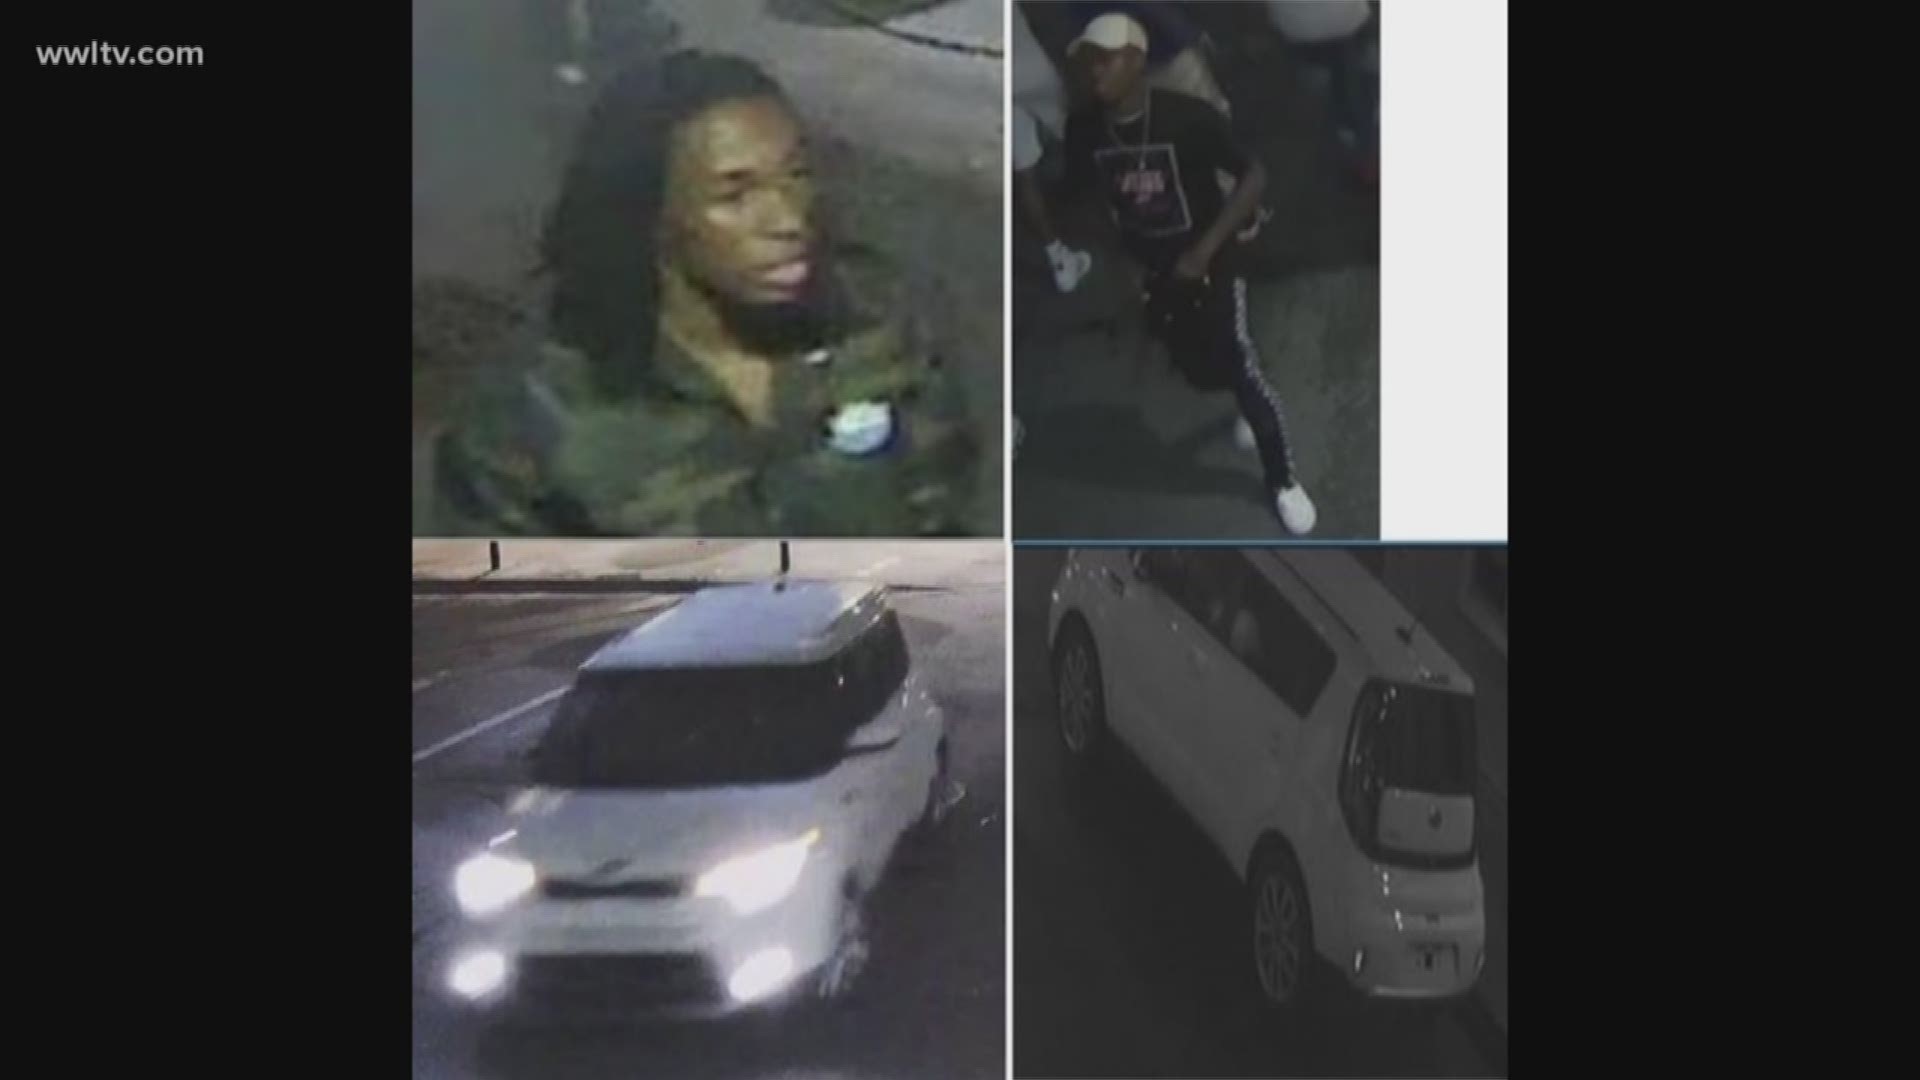 Officials said crime camera footage captured images of two people they believe to be involved in the shooting. 